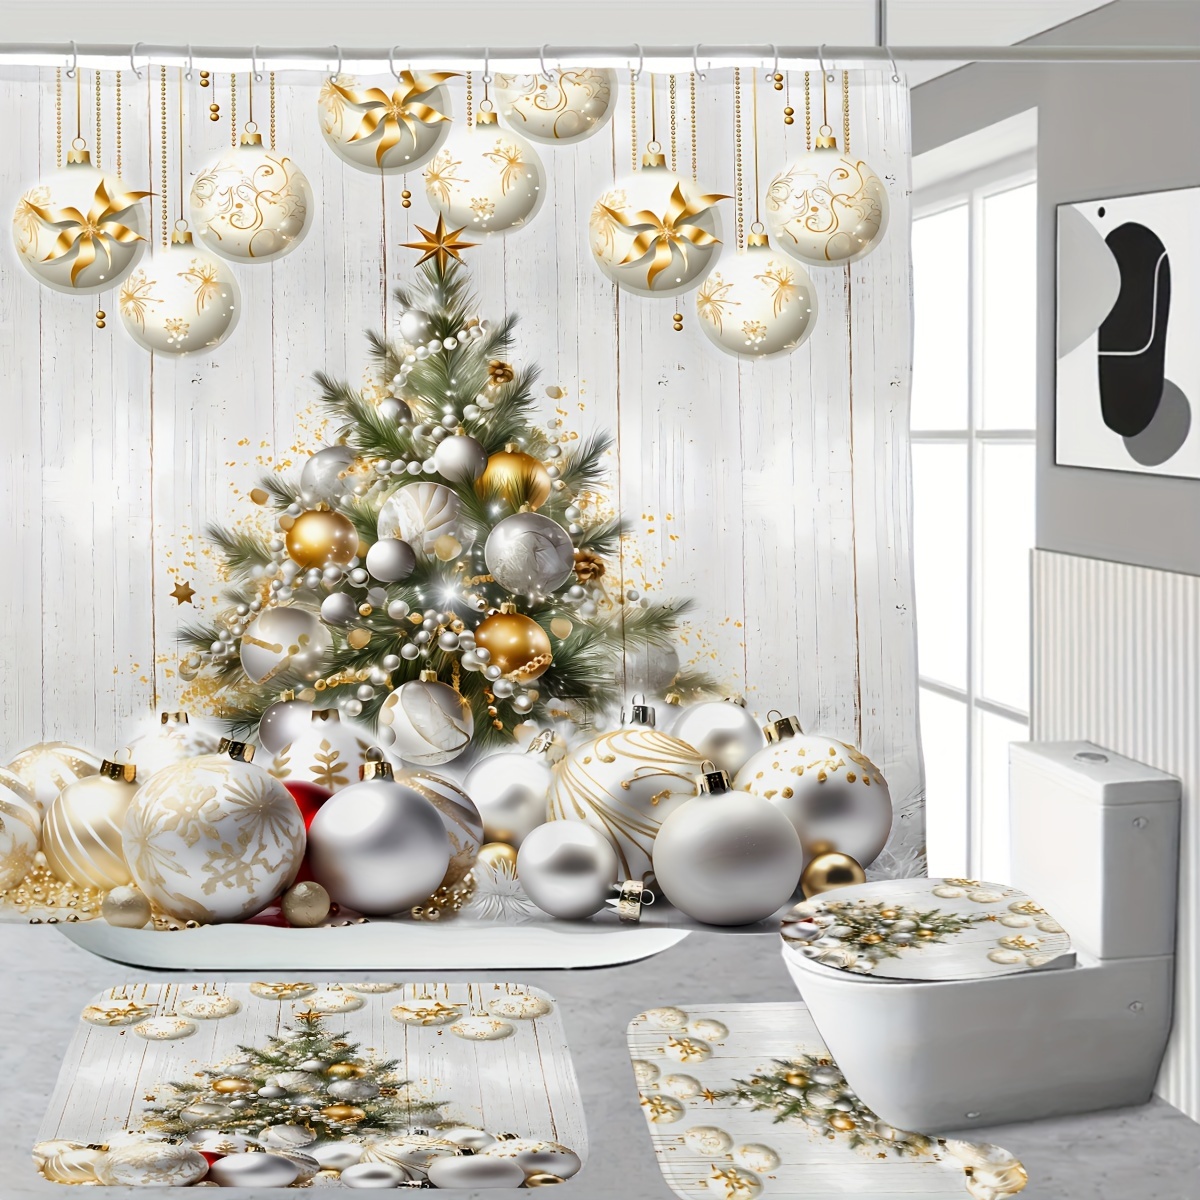 

Festive Christmas Tree And Snowman Bathroom Set: Includes 1/3/4 Piece Shower Curtain, Toilet Seat Cover, And Bath Mat With 12 Plastic Hooks - 72" X 72" (180cm X 180cm)